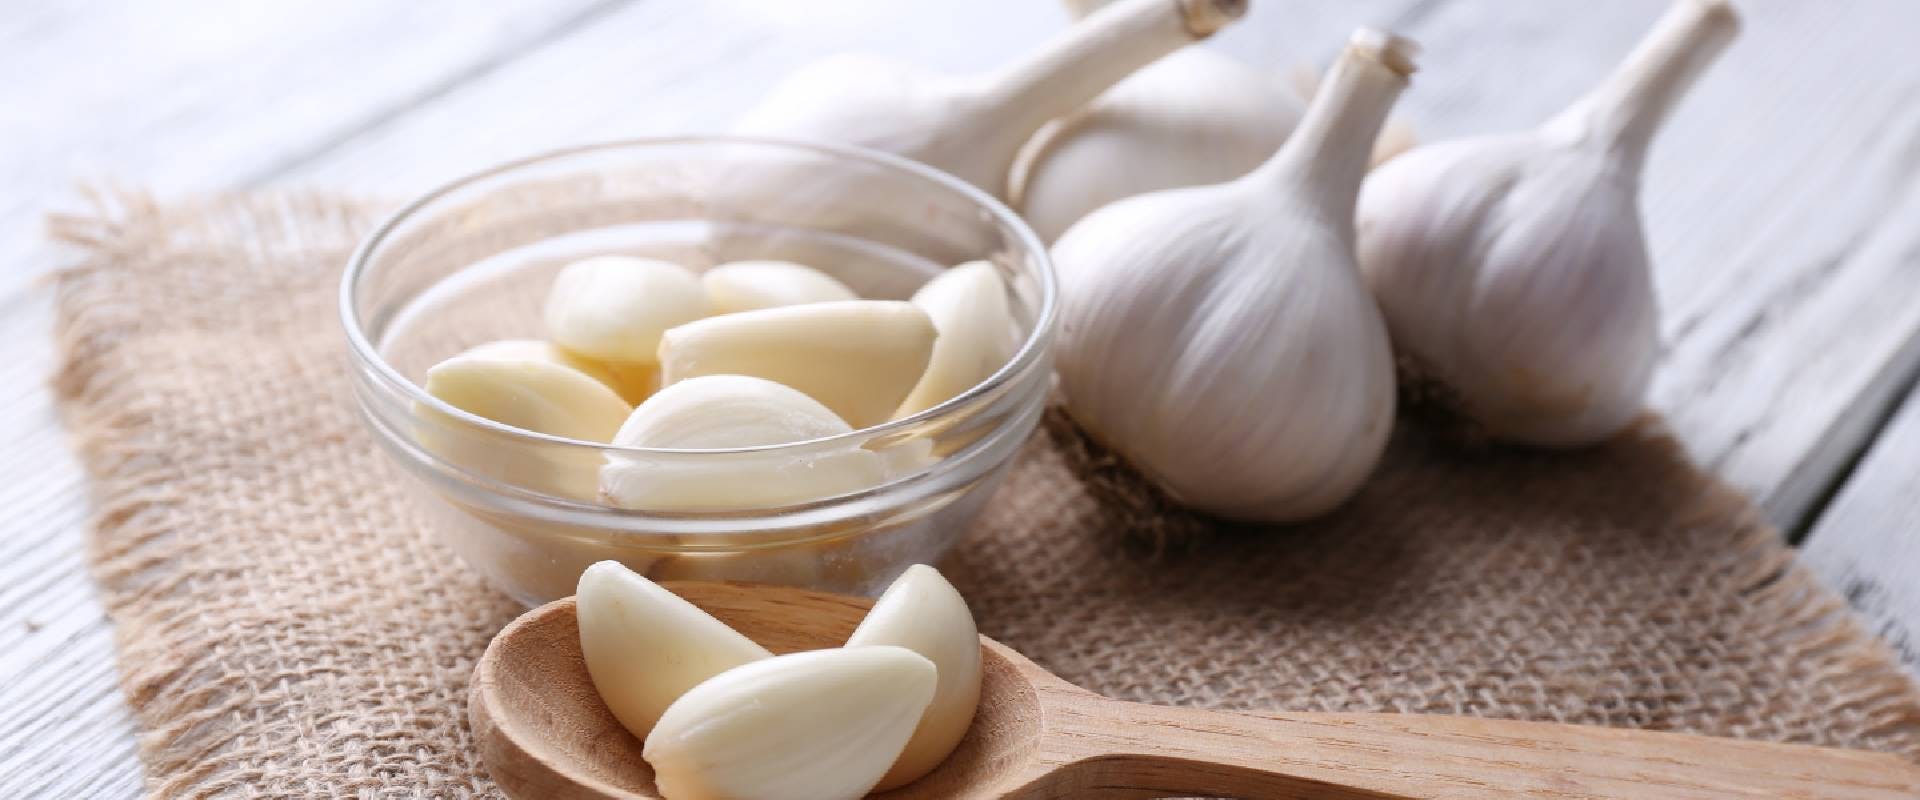 Peeled cloves of garlic in glass bowl 